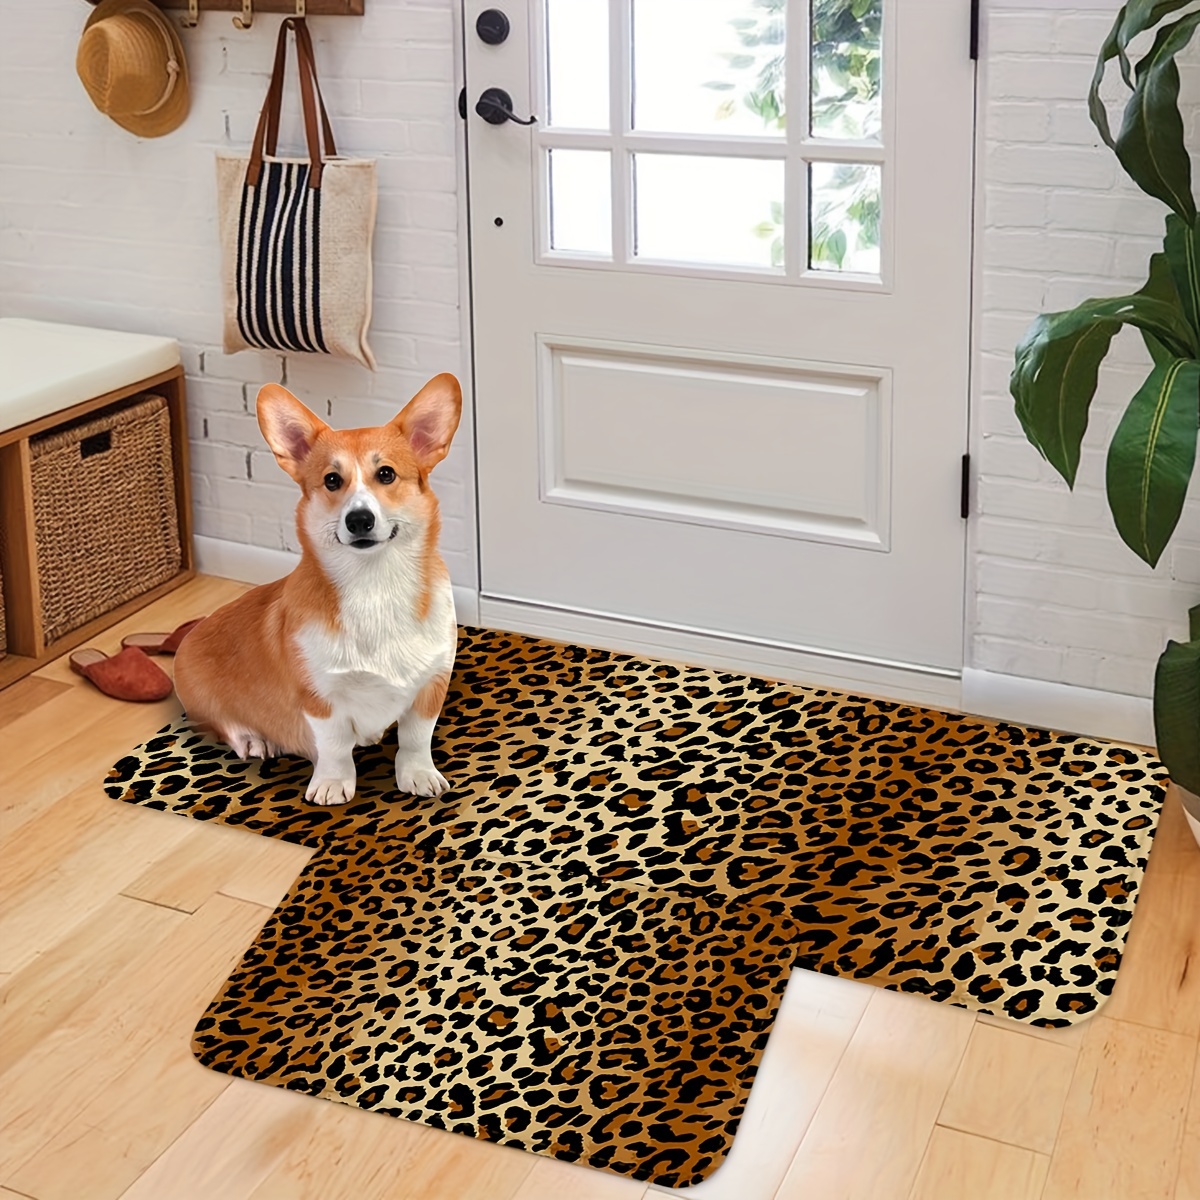 

Leopard Print Butterfly Kitchen Mats - Non-slip, Durable & Machine Washable Runner Rugs For Home, Office, And Bathroom - Comfortable Standing Pads For Sink, Laundry Room - Spring Decor